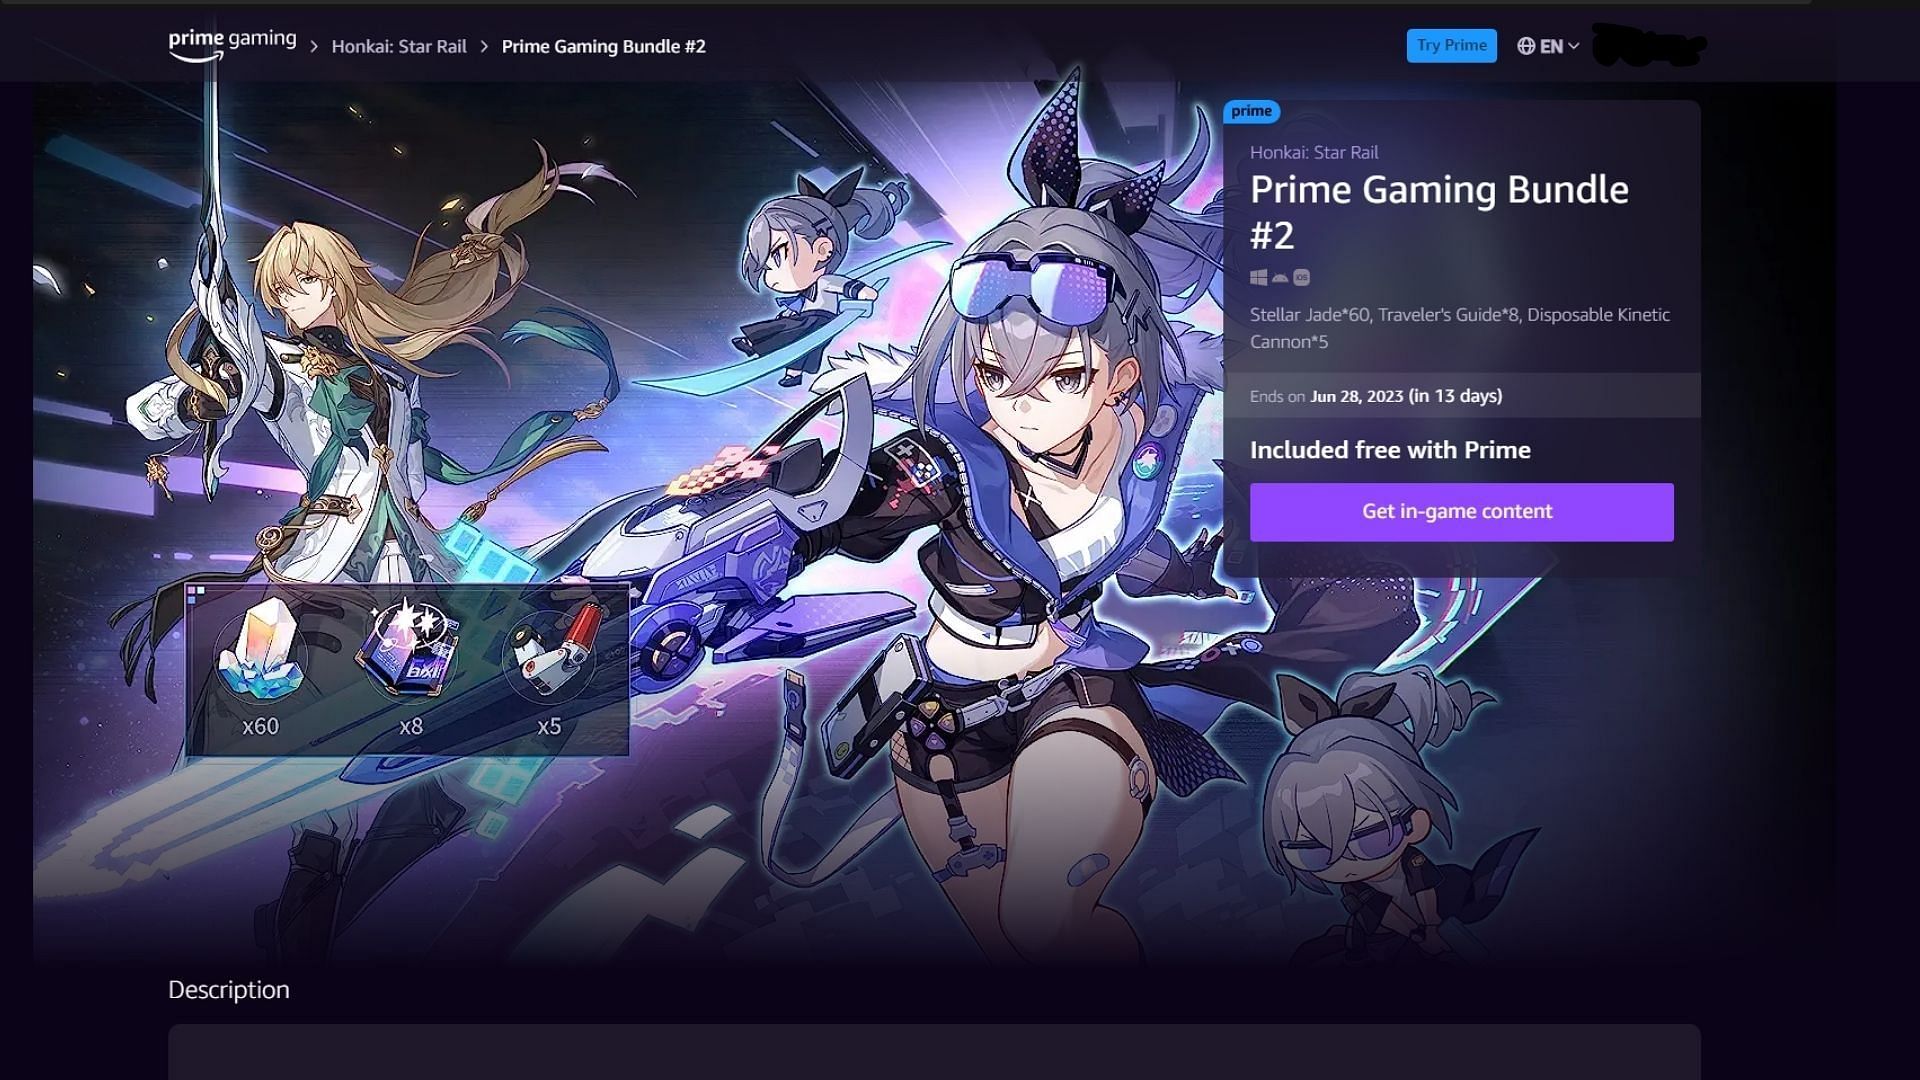 Snap up some freebies in Honkai Star Rail and Roblox with Prime Gaming